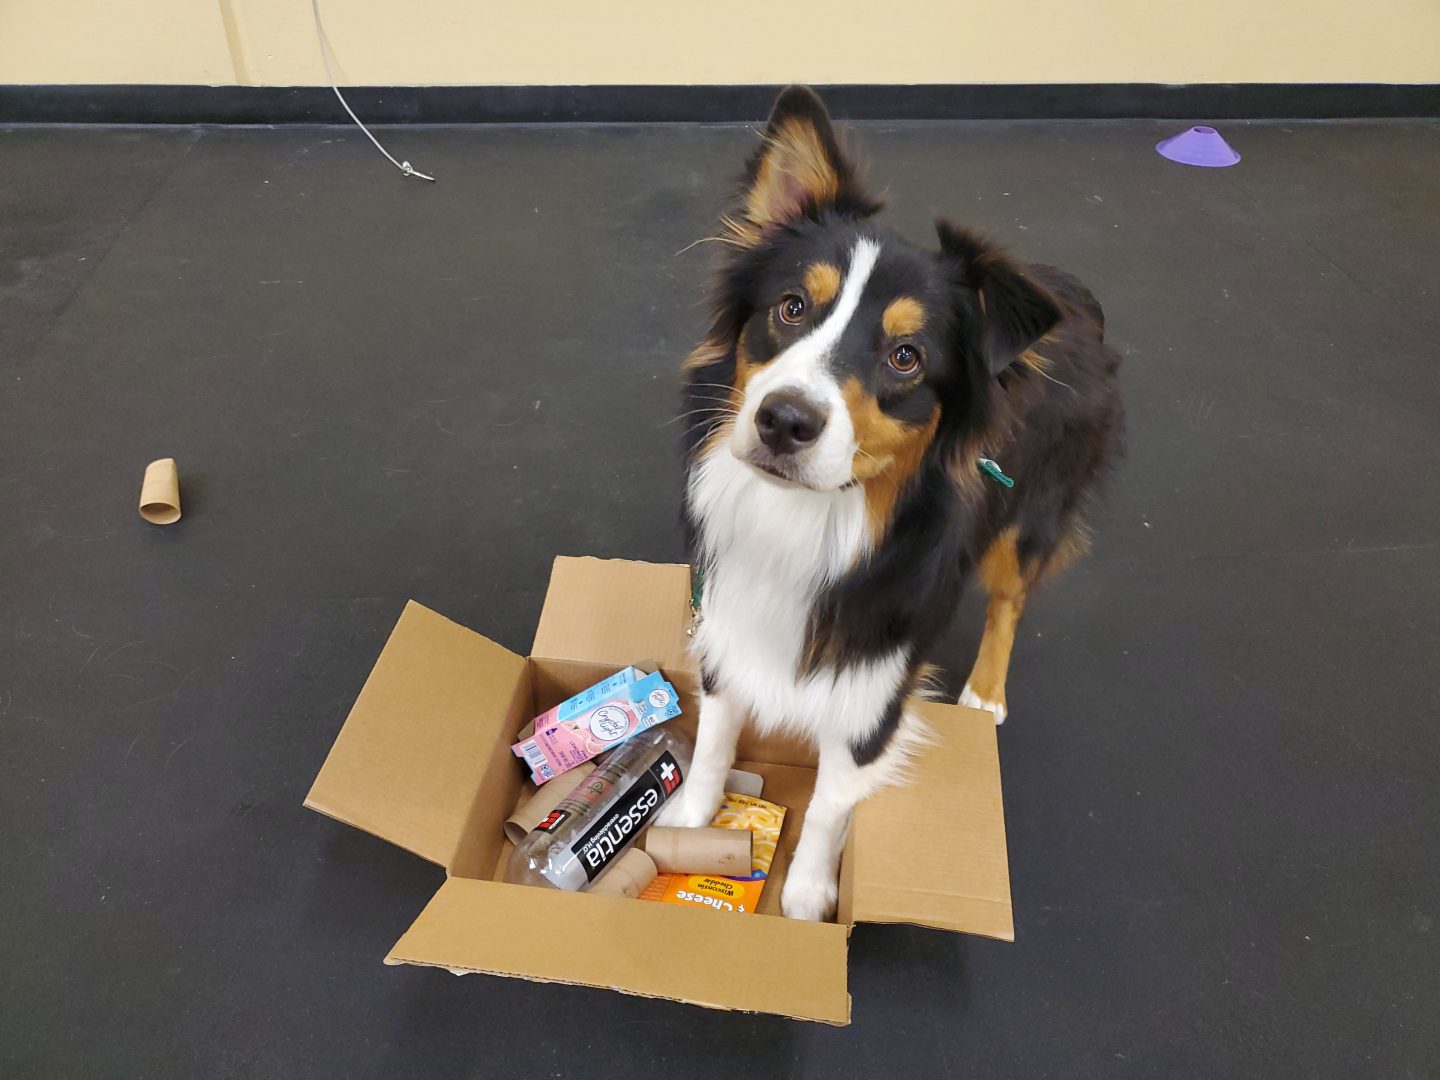 https://wagsandwiggles.com/wp-content/uploads/2019/10/Canine-Enrichment-Day-10.jpg